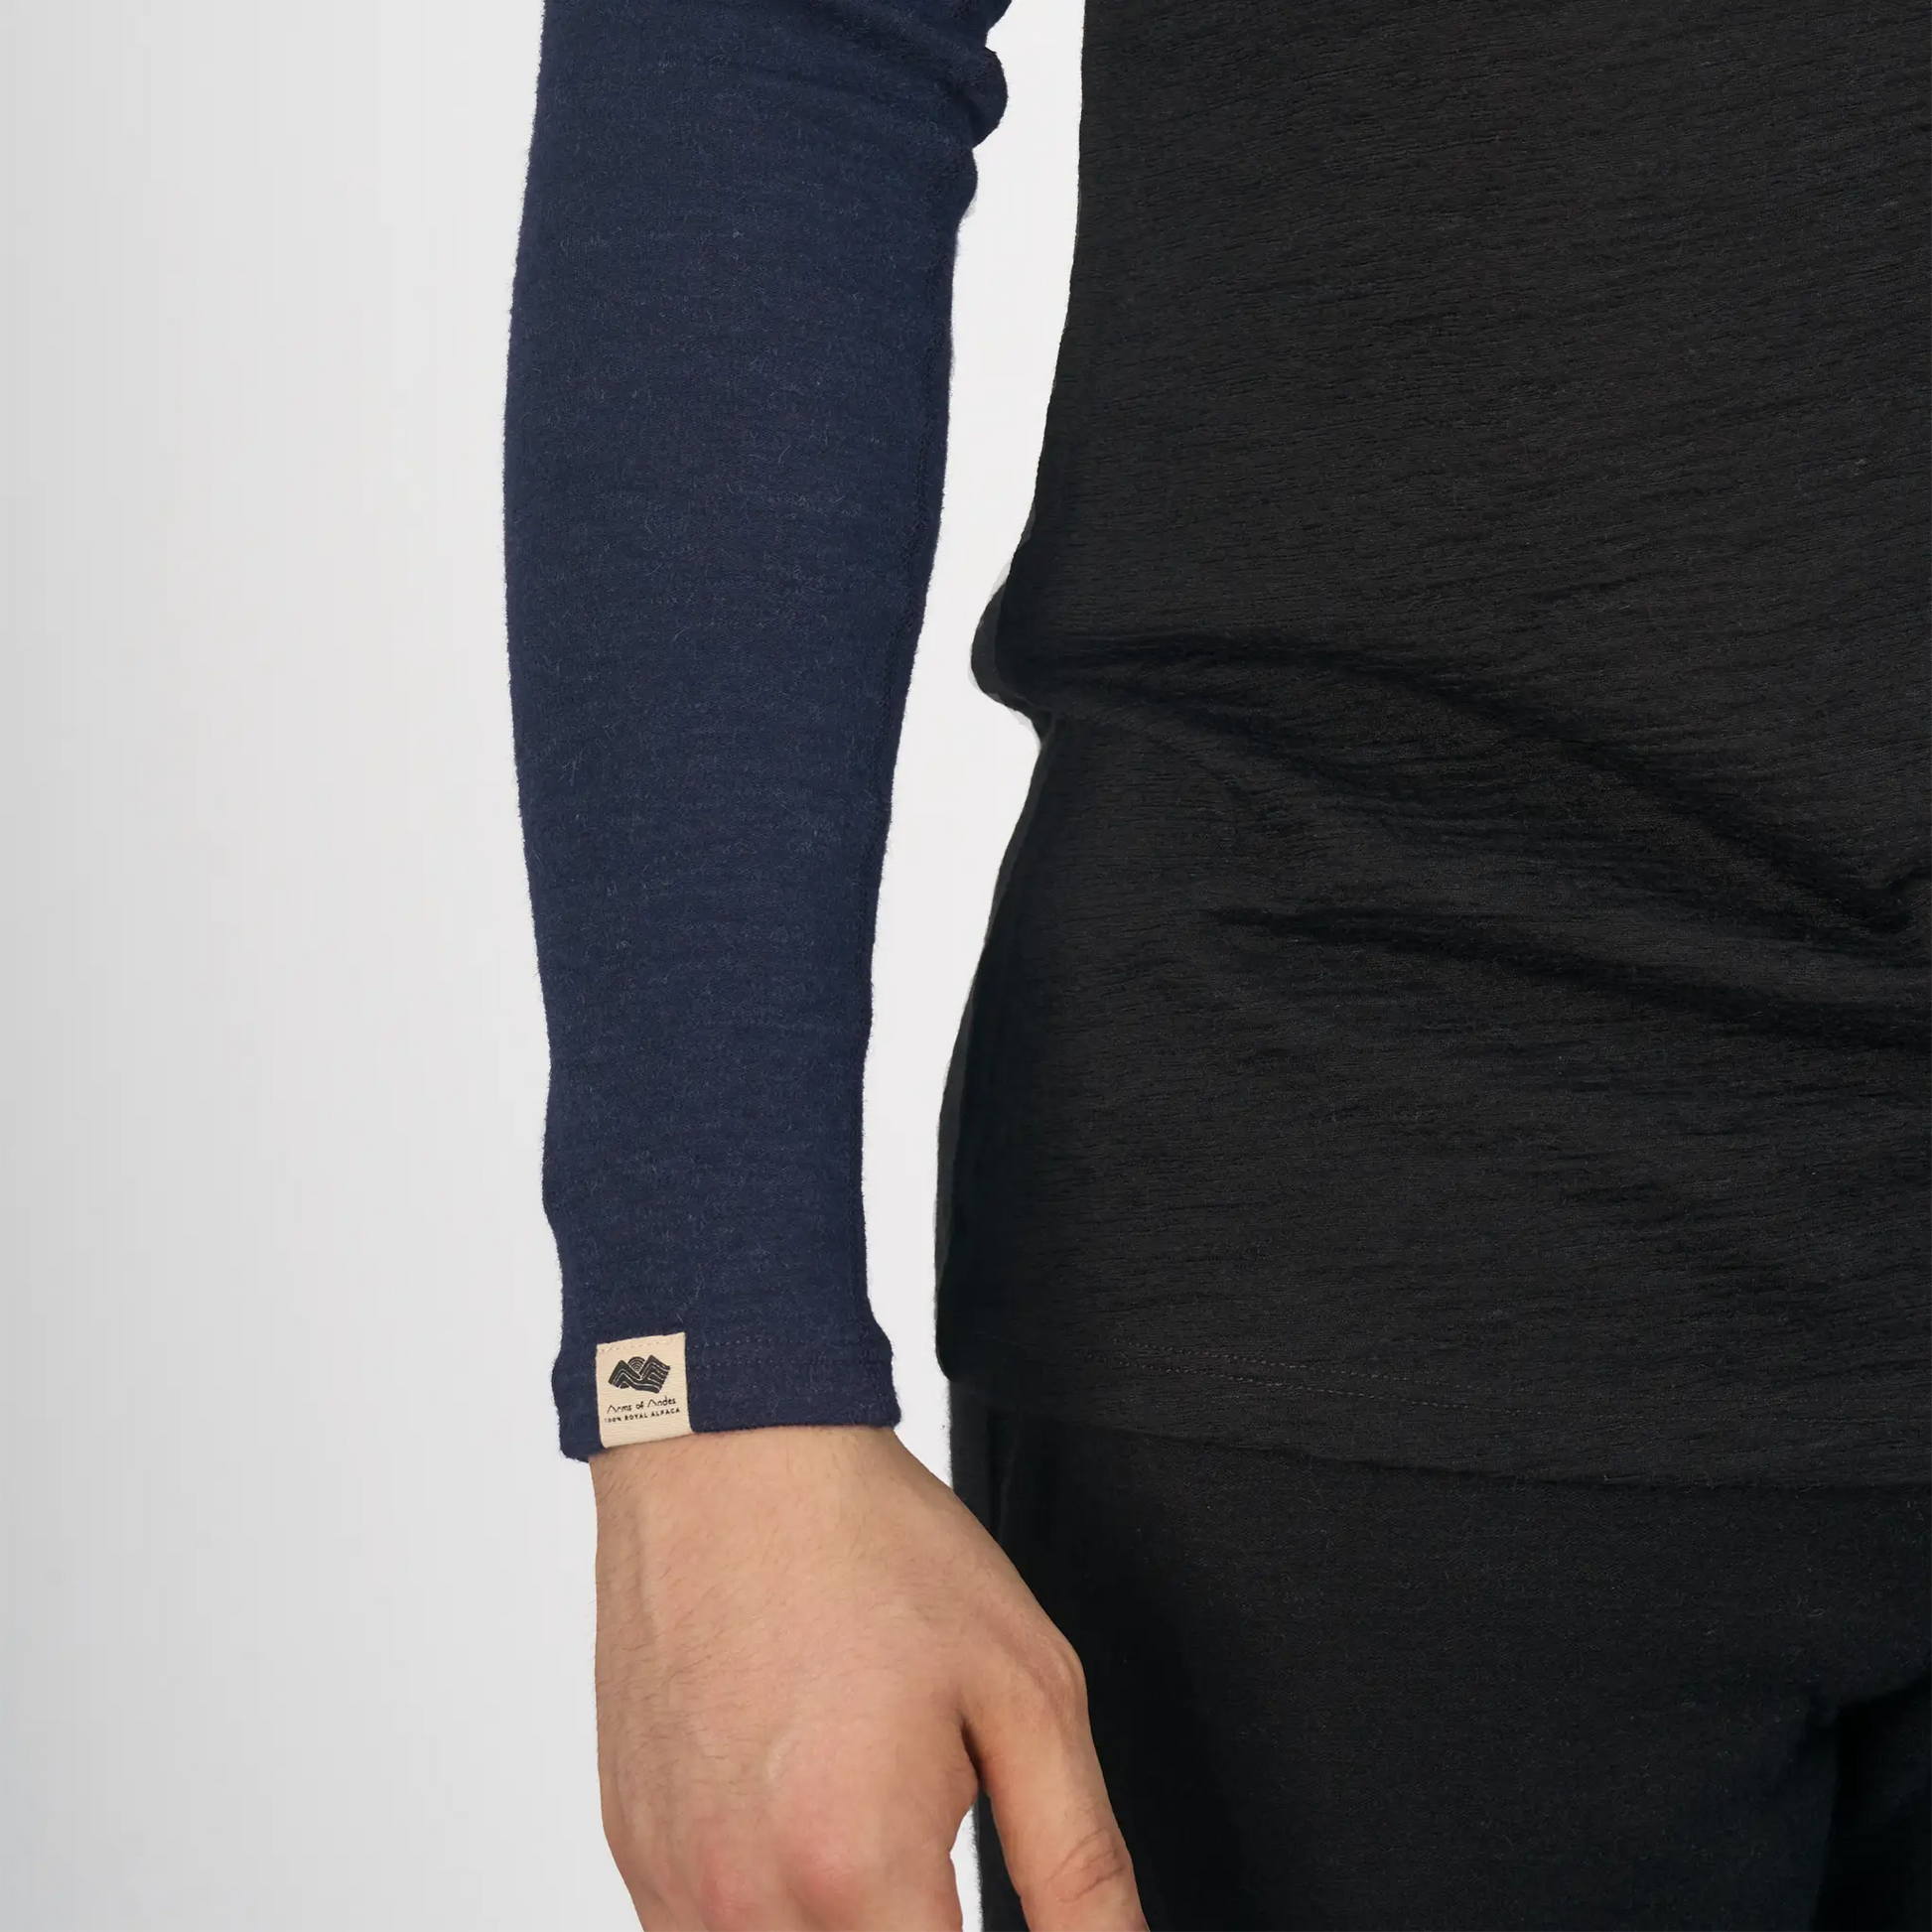 mens moisture wicking sleeve color natural blue